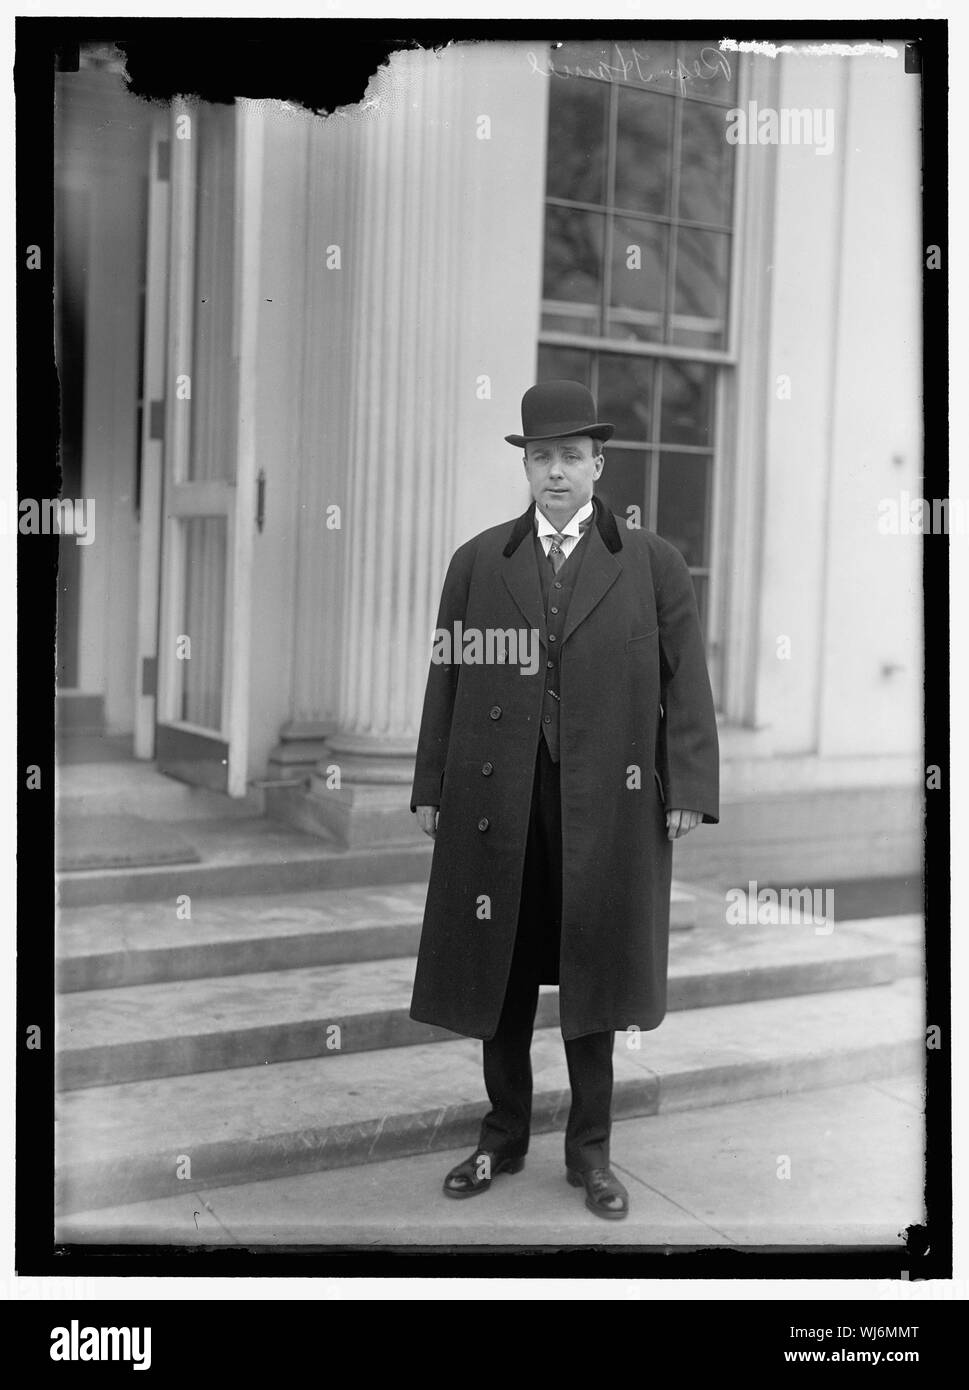 HAMILL, JAMES ALPHONSUS. REP. FROM NEW JERSEY, 1907-1921 Stock Photo